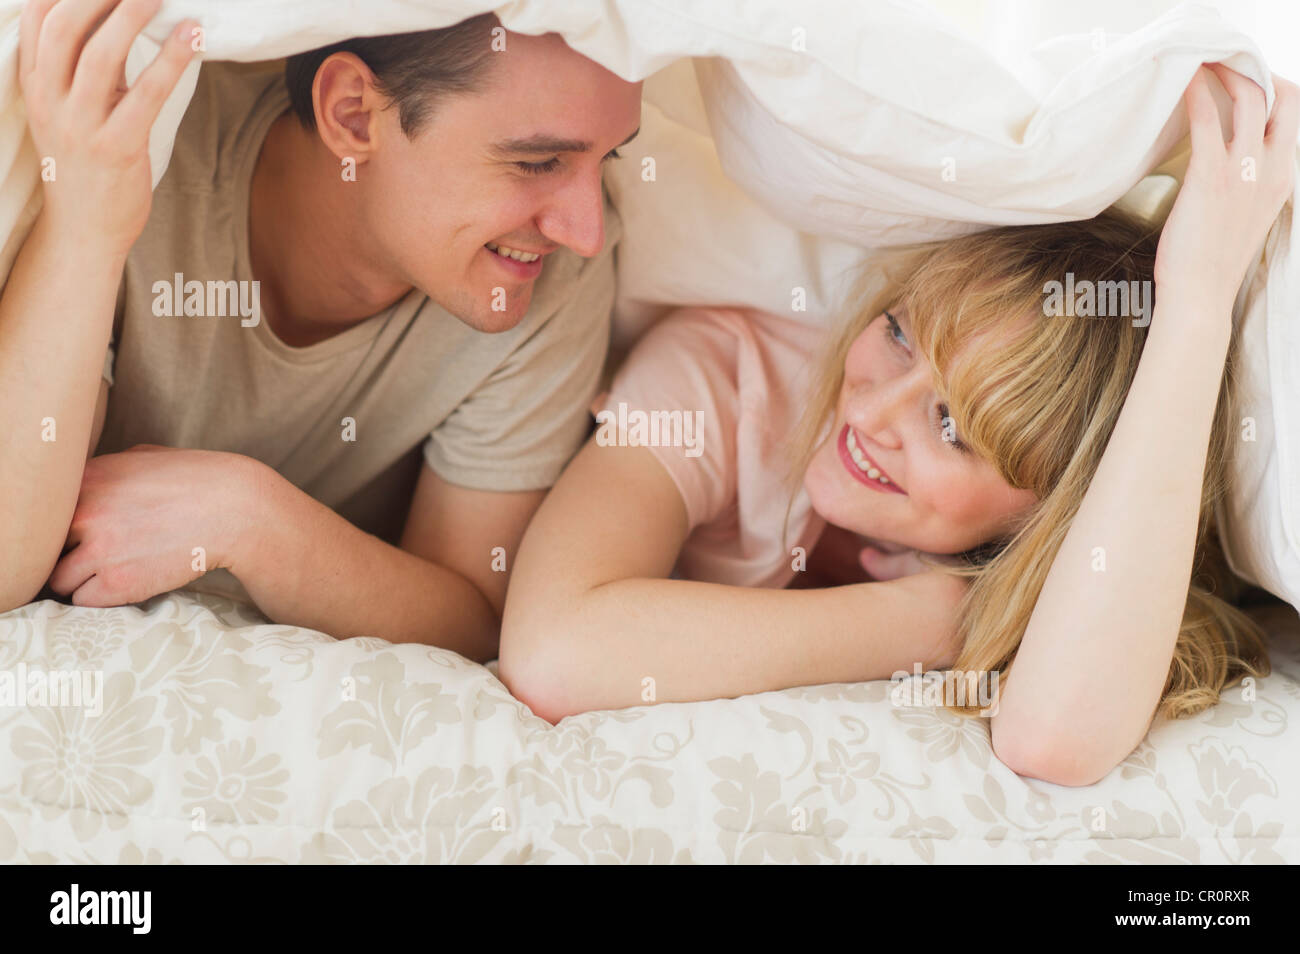 USA, New Jersey, Jersey City, Couple lying on bed sous couette Banque D'Images